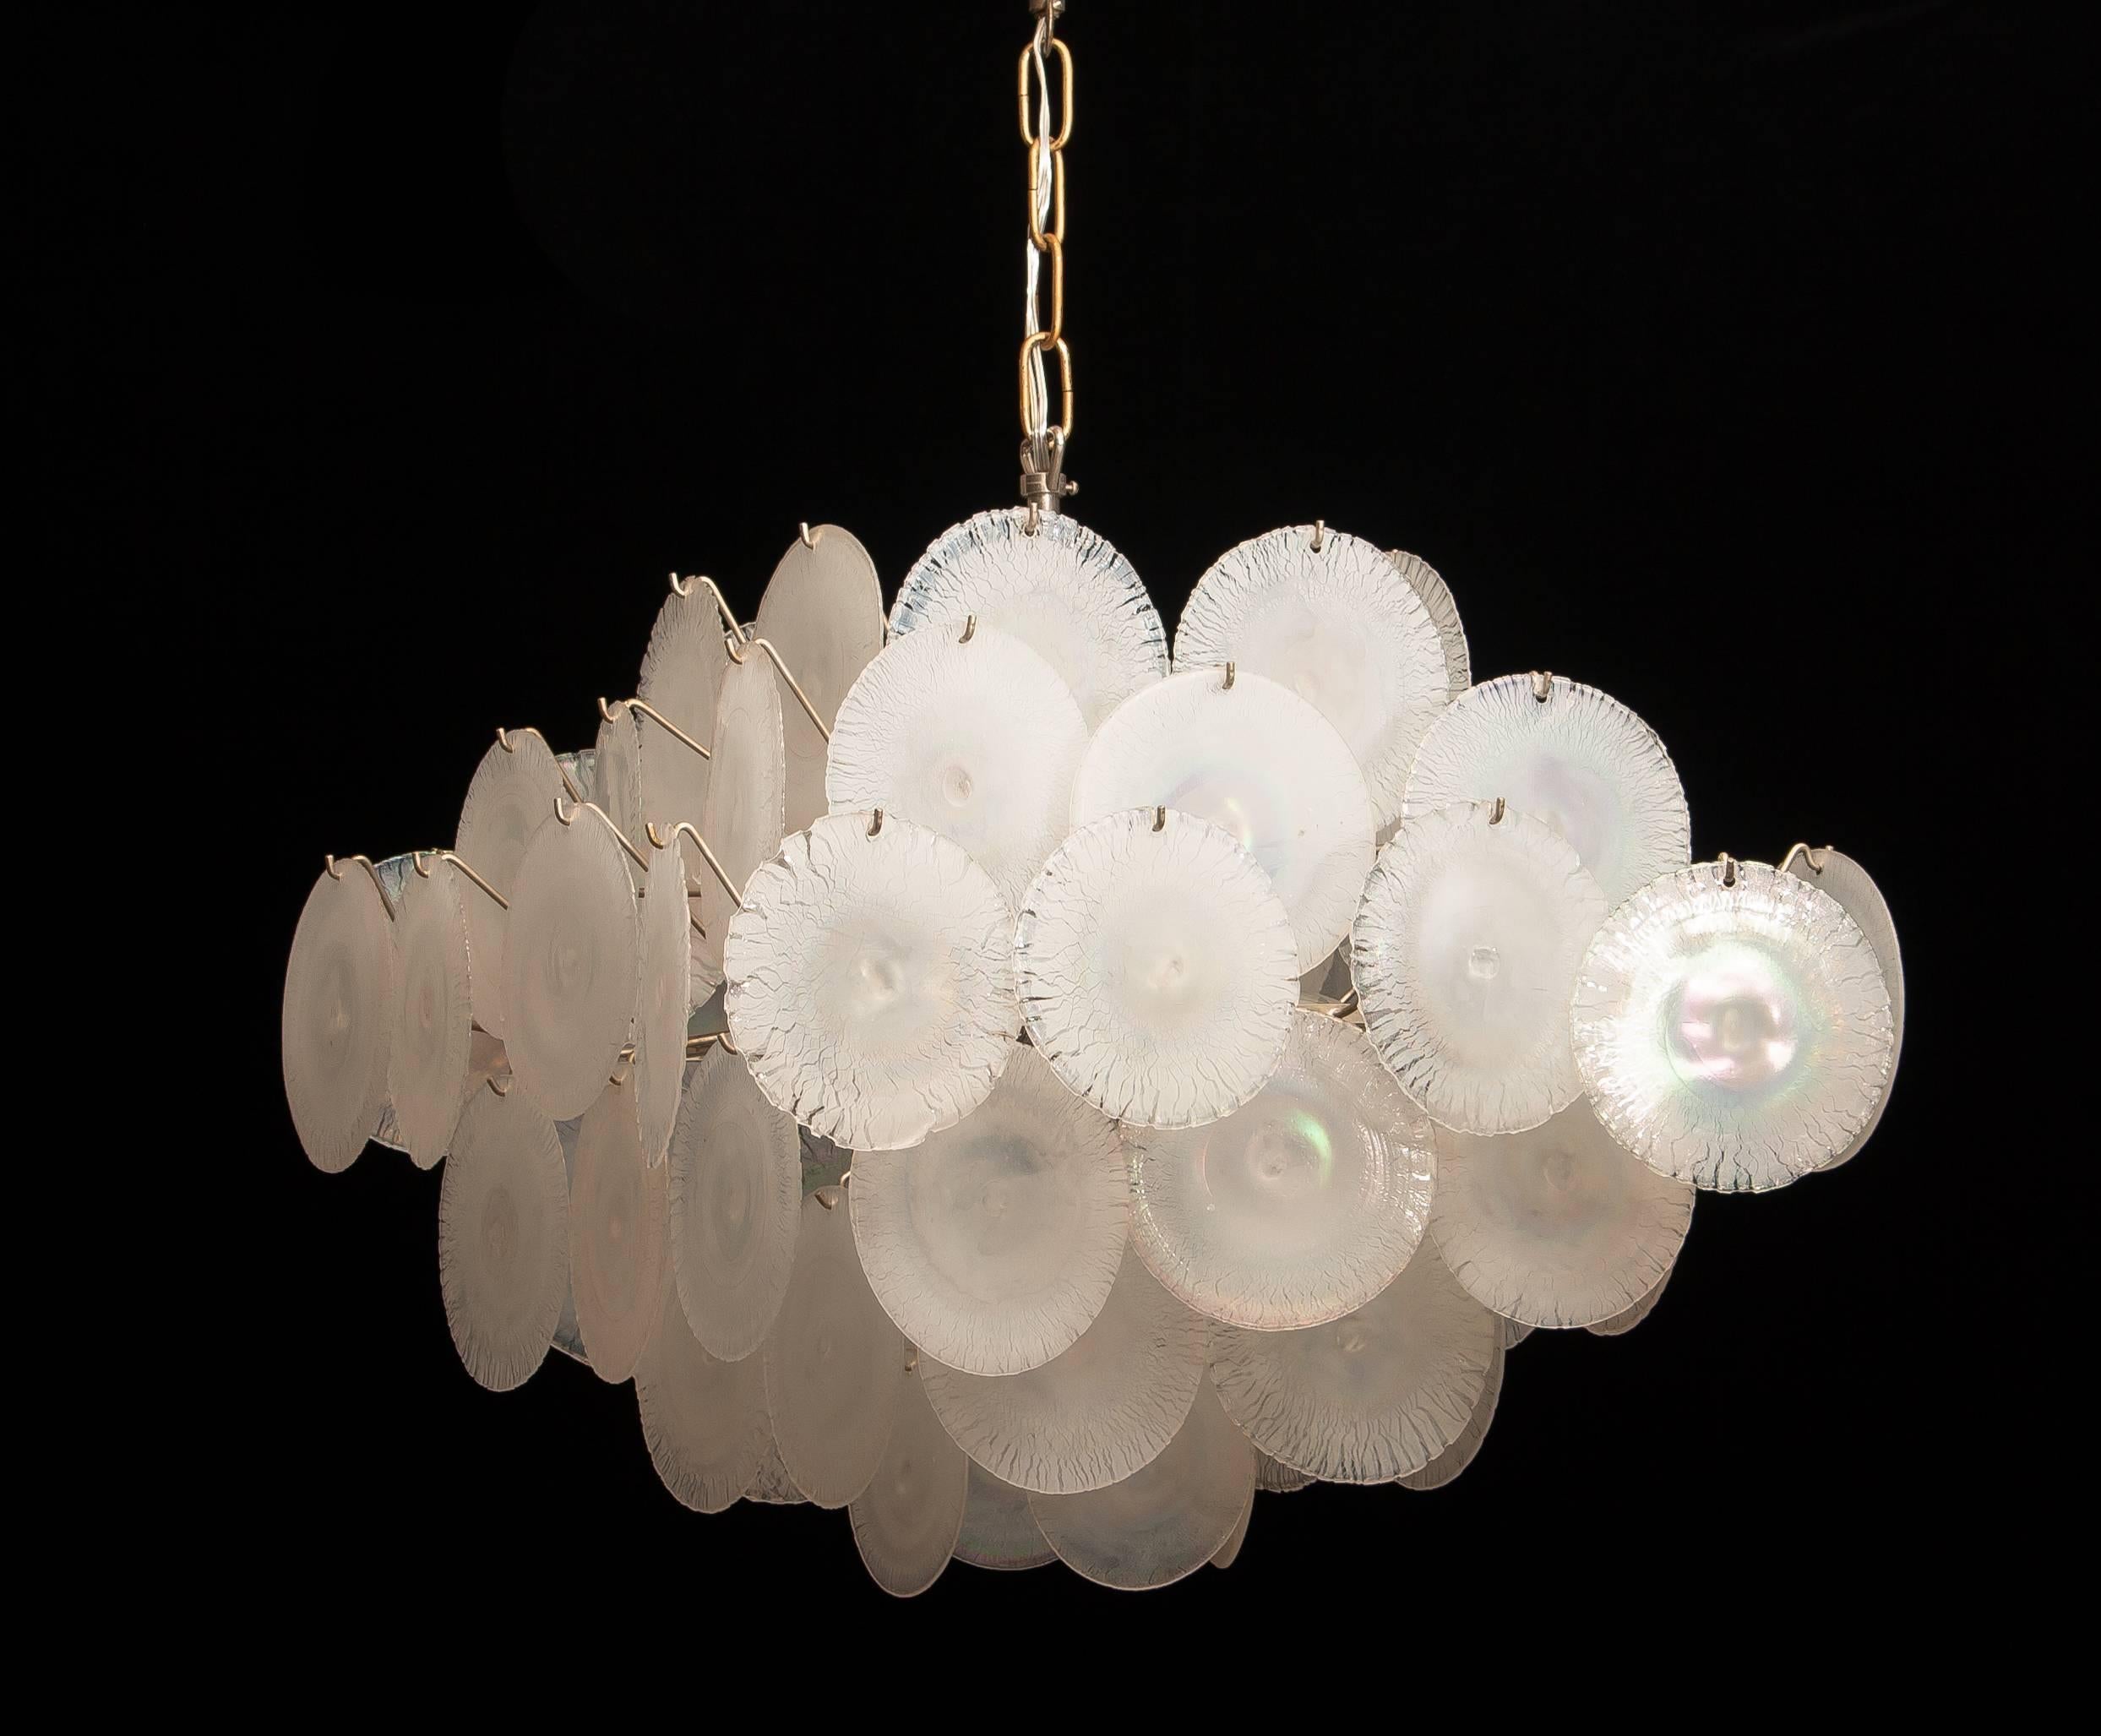 Gino Vistosi Chandelier with White or Pearl Murano Crystal Discs 4